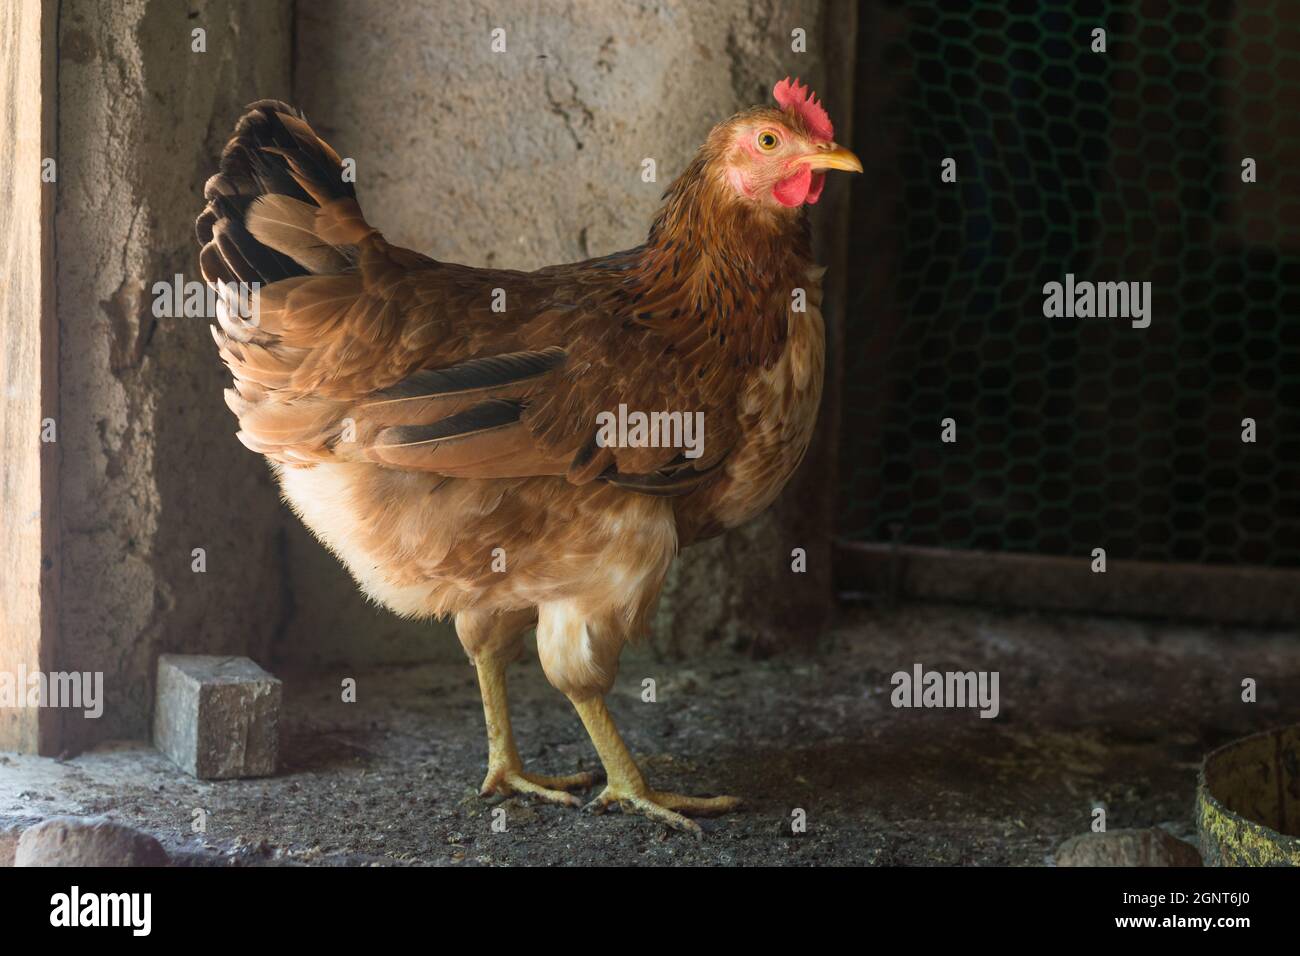 egg laying brown chicken, domestic hen in a chicken coop, closeup shot taken on natural light Stock Photo